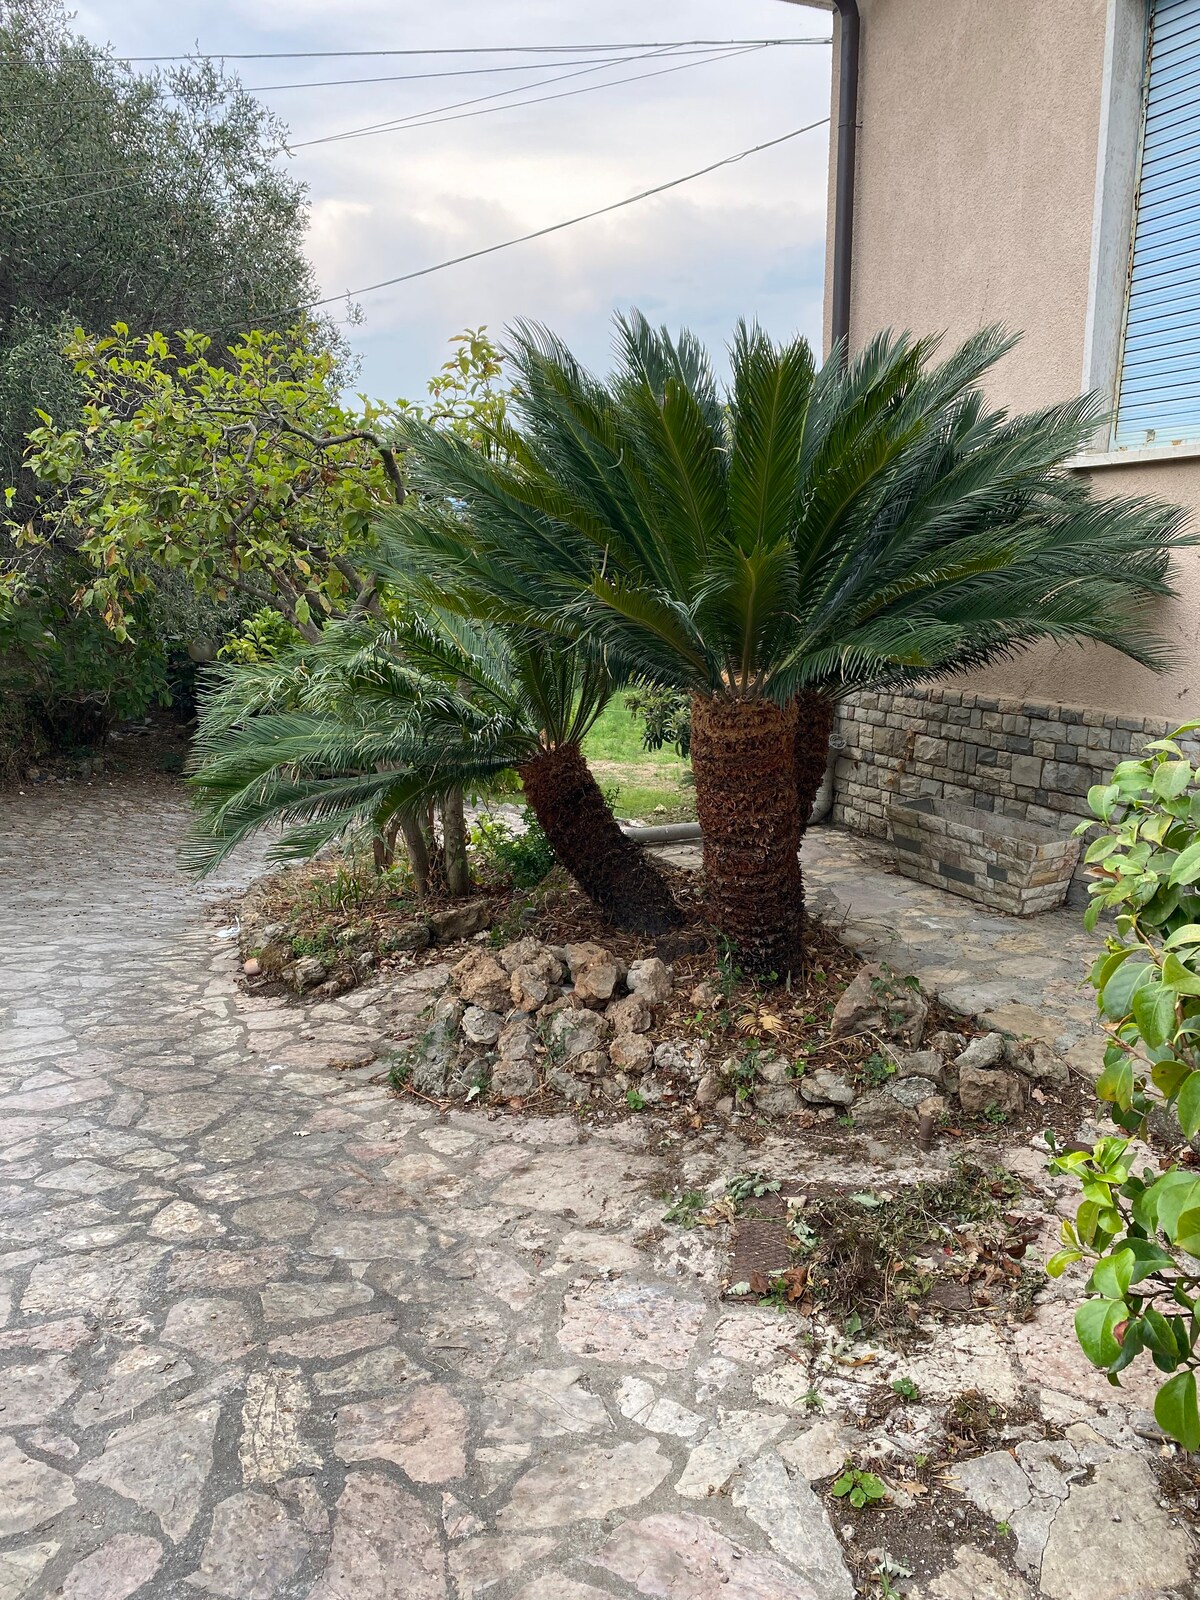 The Garden of the Cycas - Vacation homes for Rent in Romito Magra, Liguria,  Italy - Airbnb